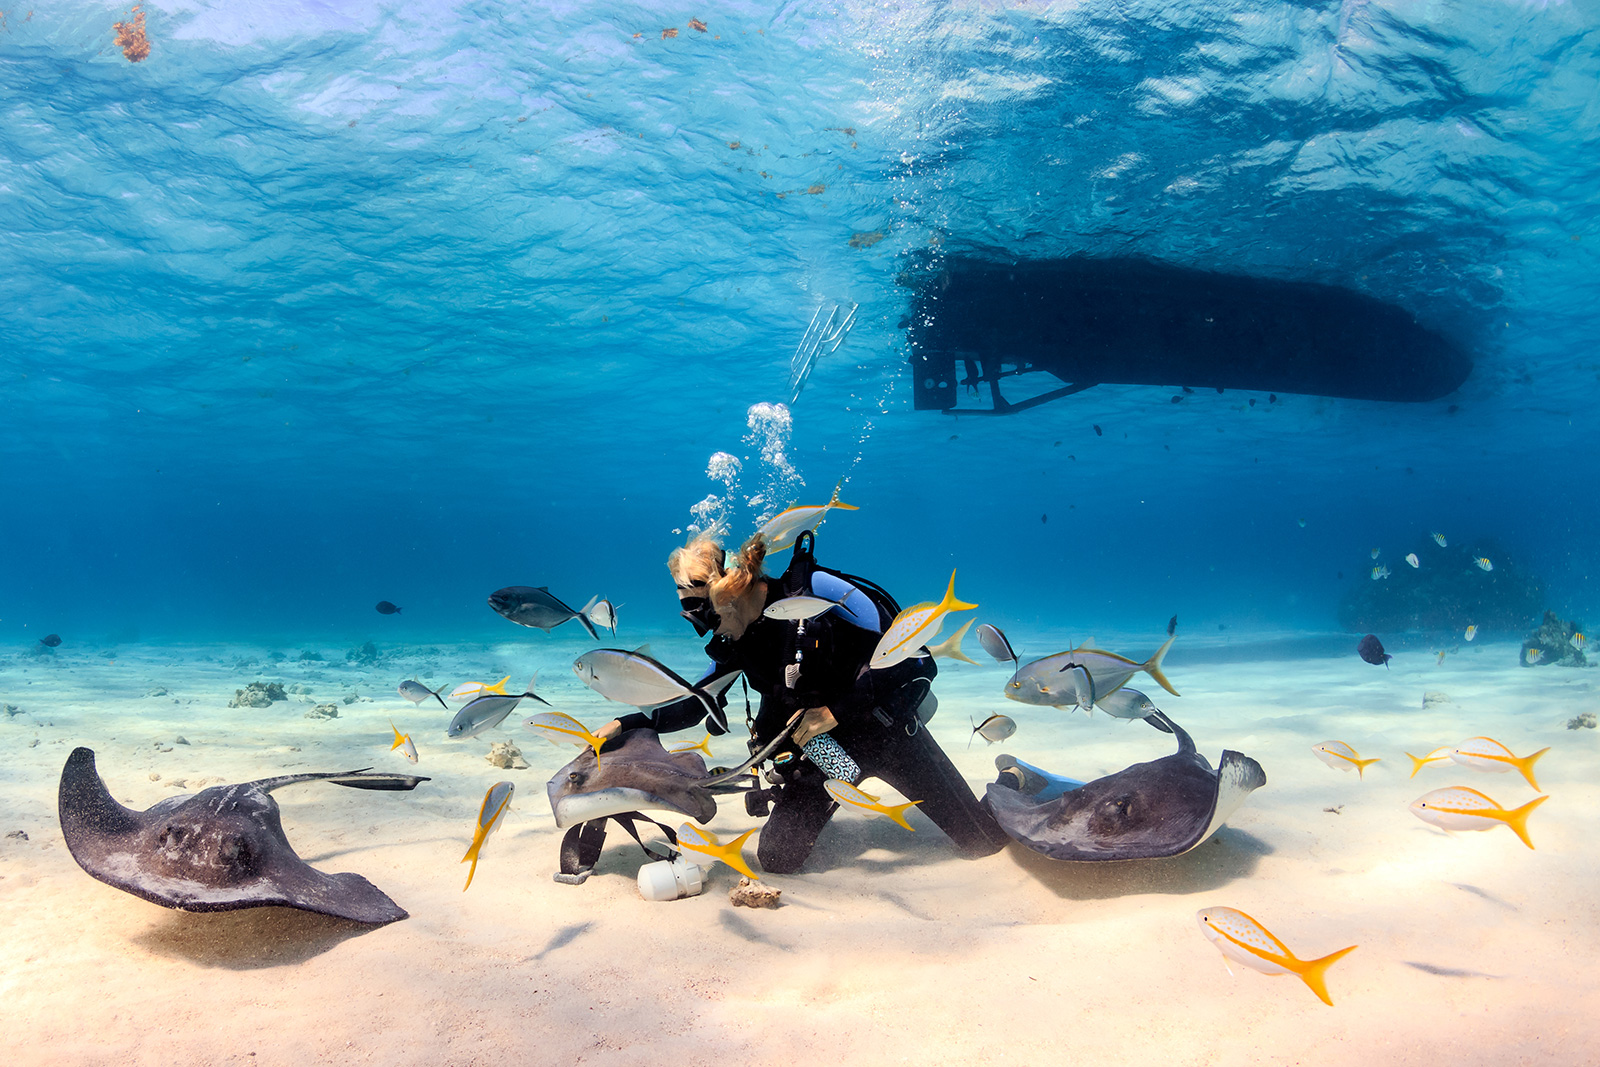 Scuba Dive At These Top Diving Spots In The Caribbean